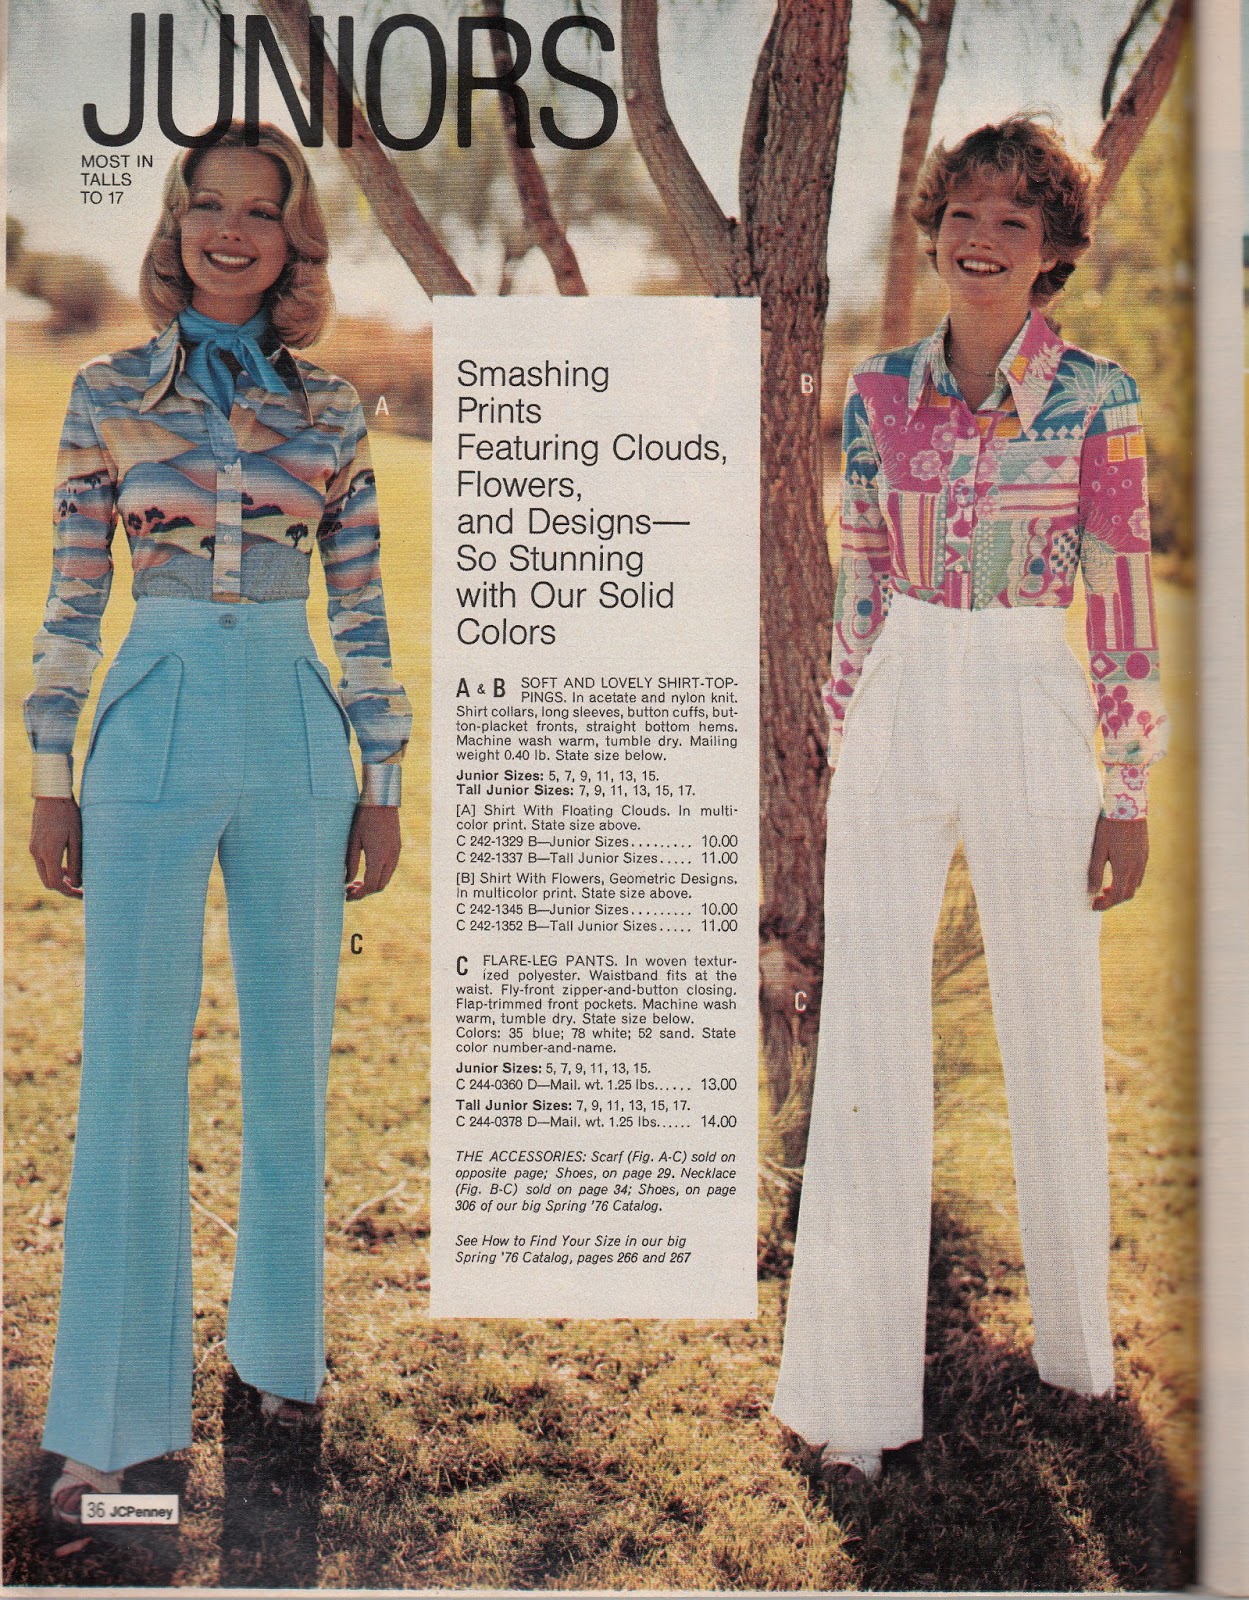 Kathy Loghry Blogspot: That's So 70s: High Rise Pants